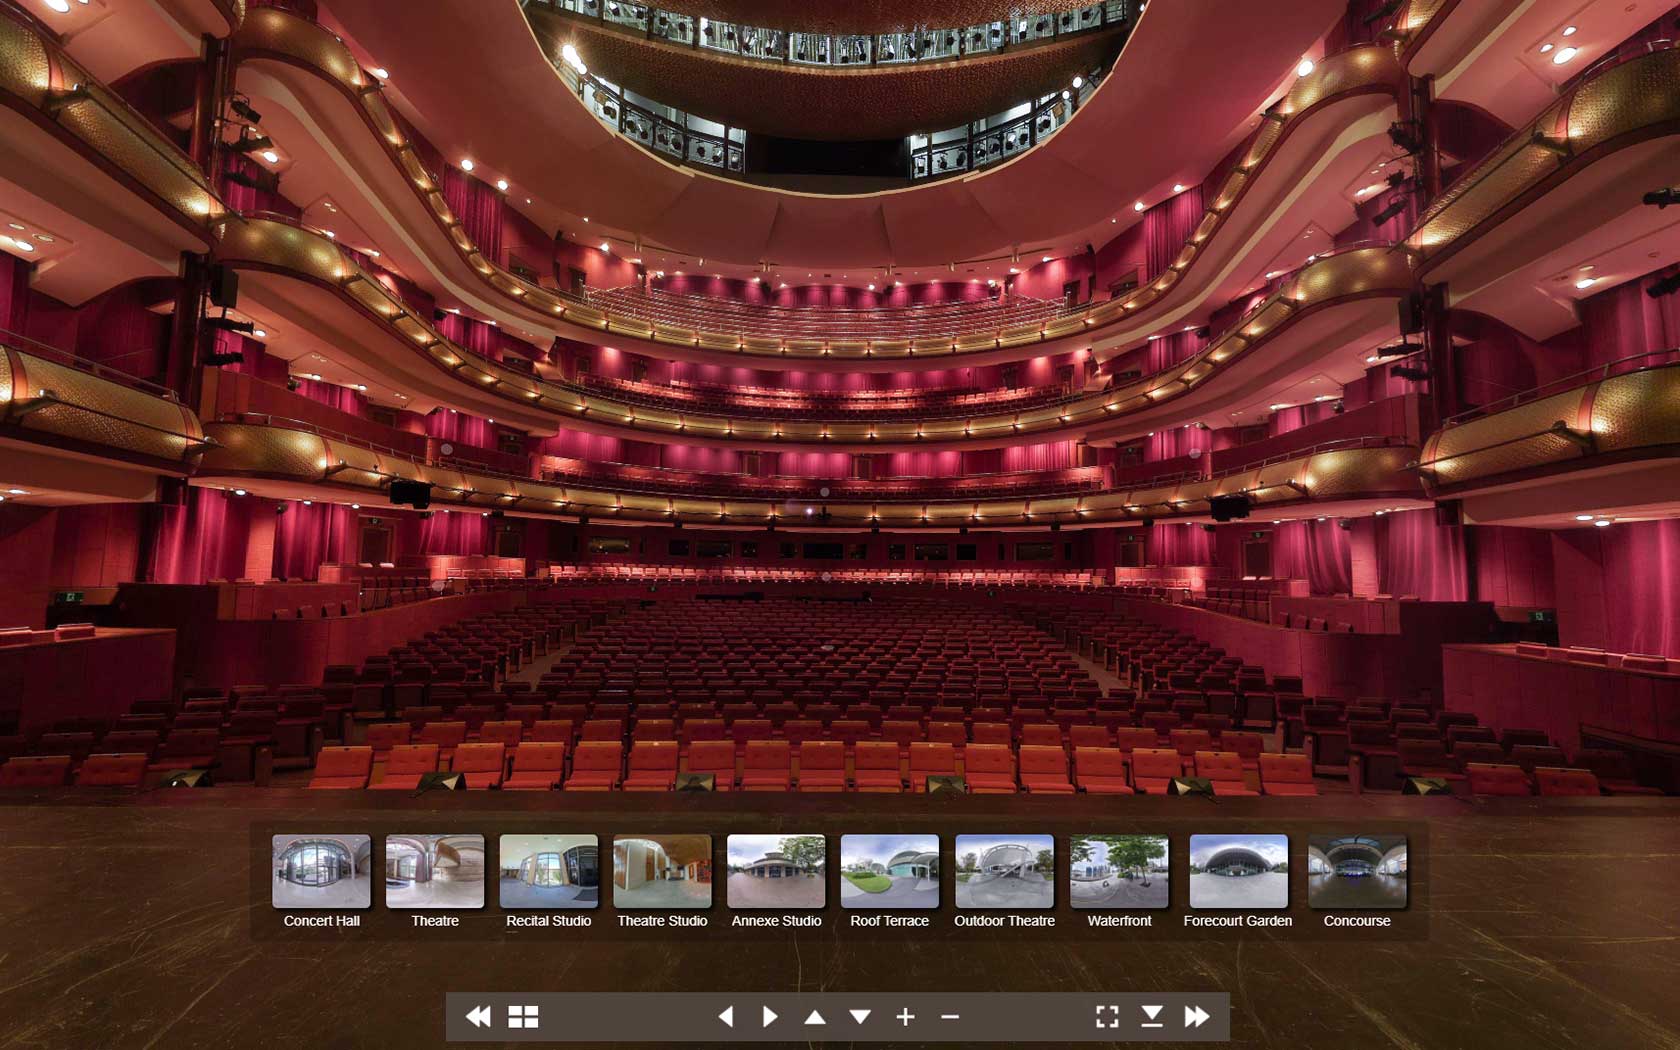 Image of interior of Esplanade Theatre seen from the perspective of the stage